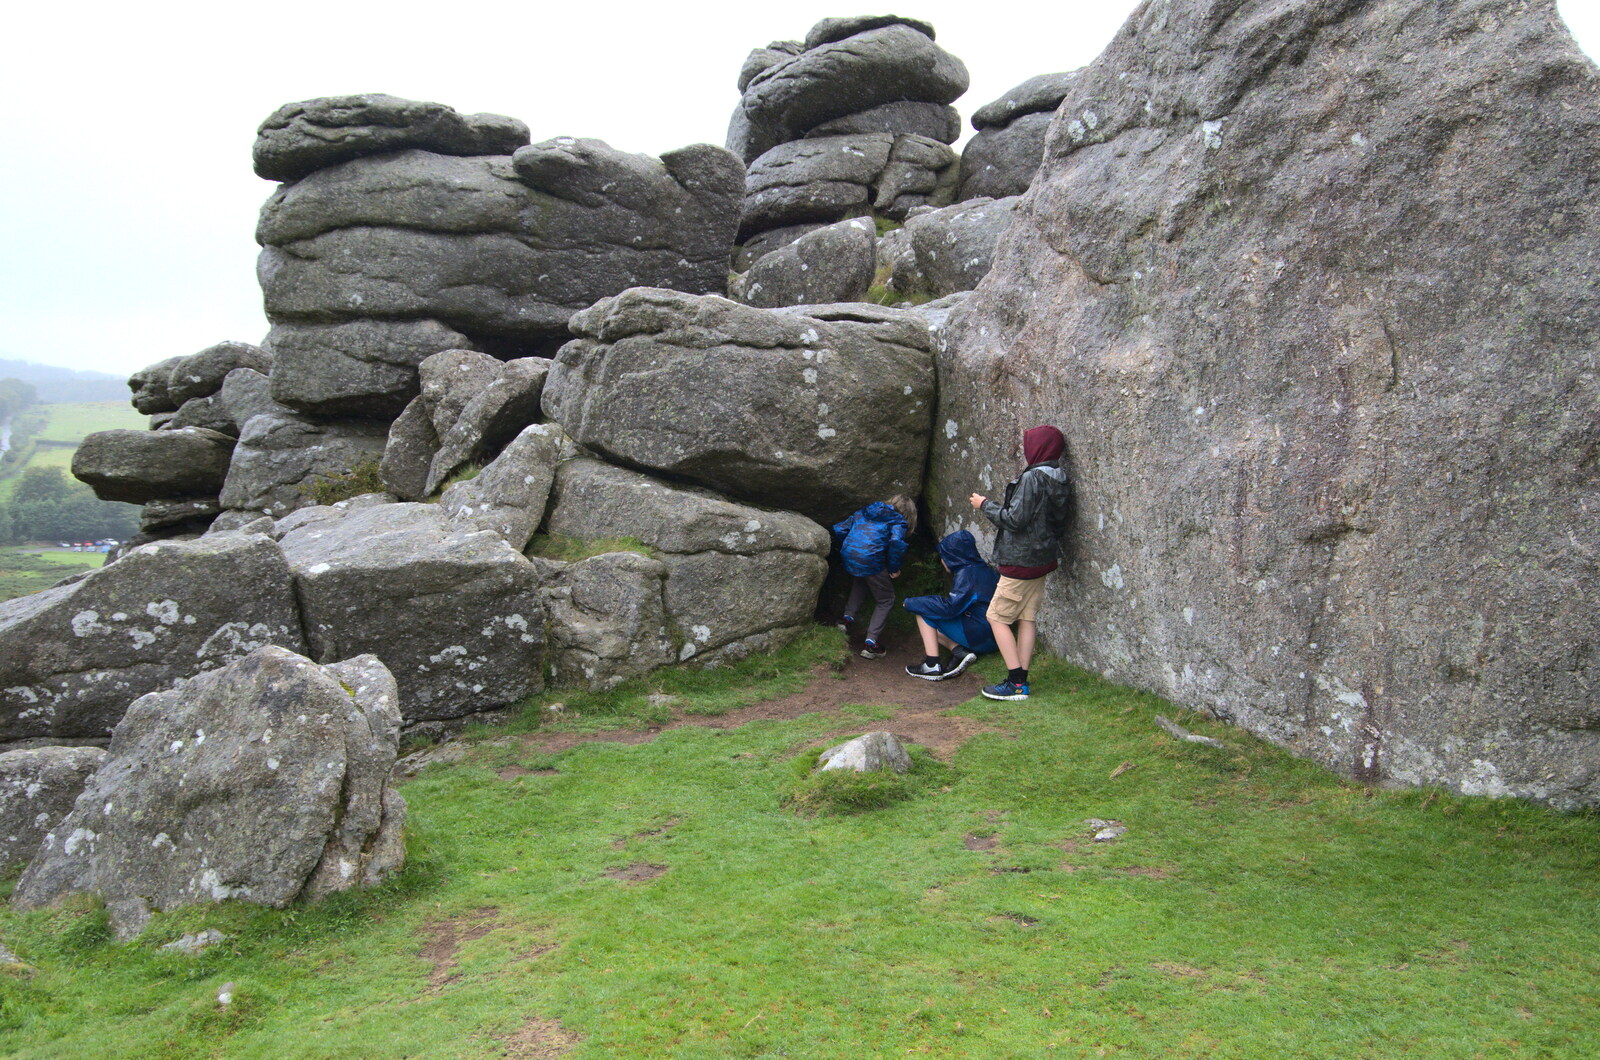 The boys inspect a cave from A Walk up Hound Tor, Dartmoor, Devon - 24th August 2020